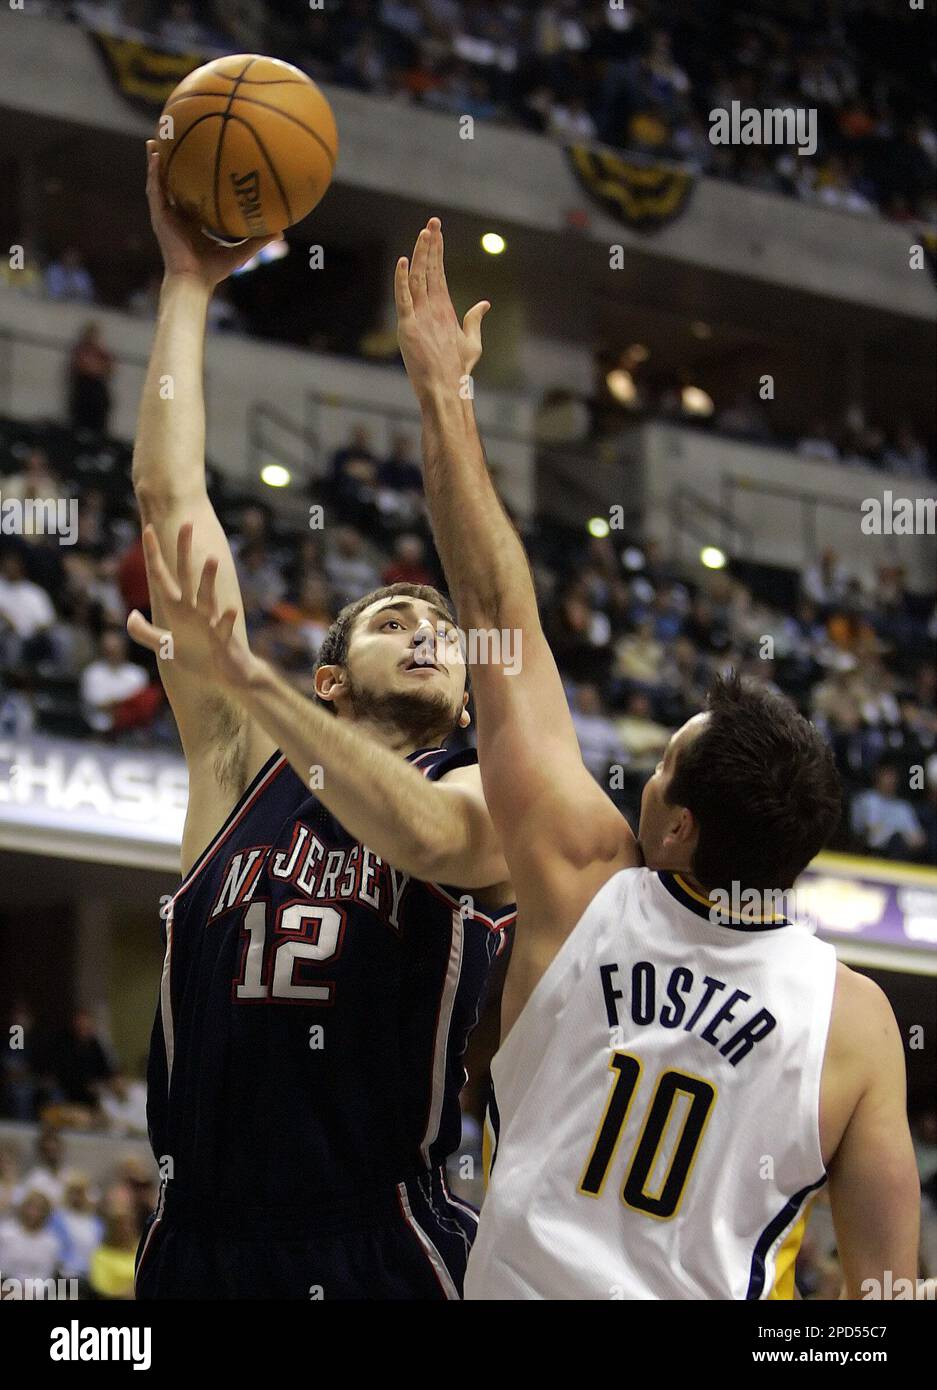 New Jersey Nets forward Nenad Krstic (12) drives to the basket against  Indiana Pacers forward Austin Croshere (44) in game 6 of their first round  playoff series at Conseco Fieldhouse in Indianapolis